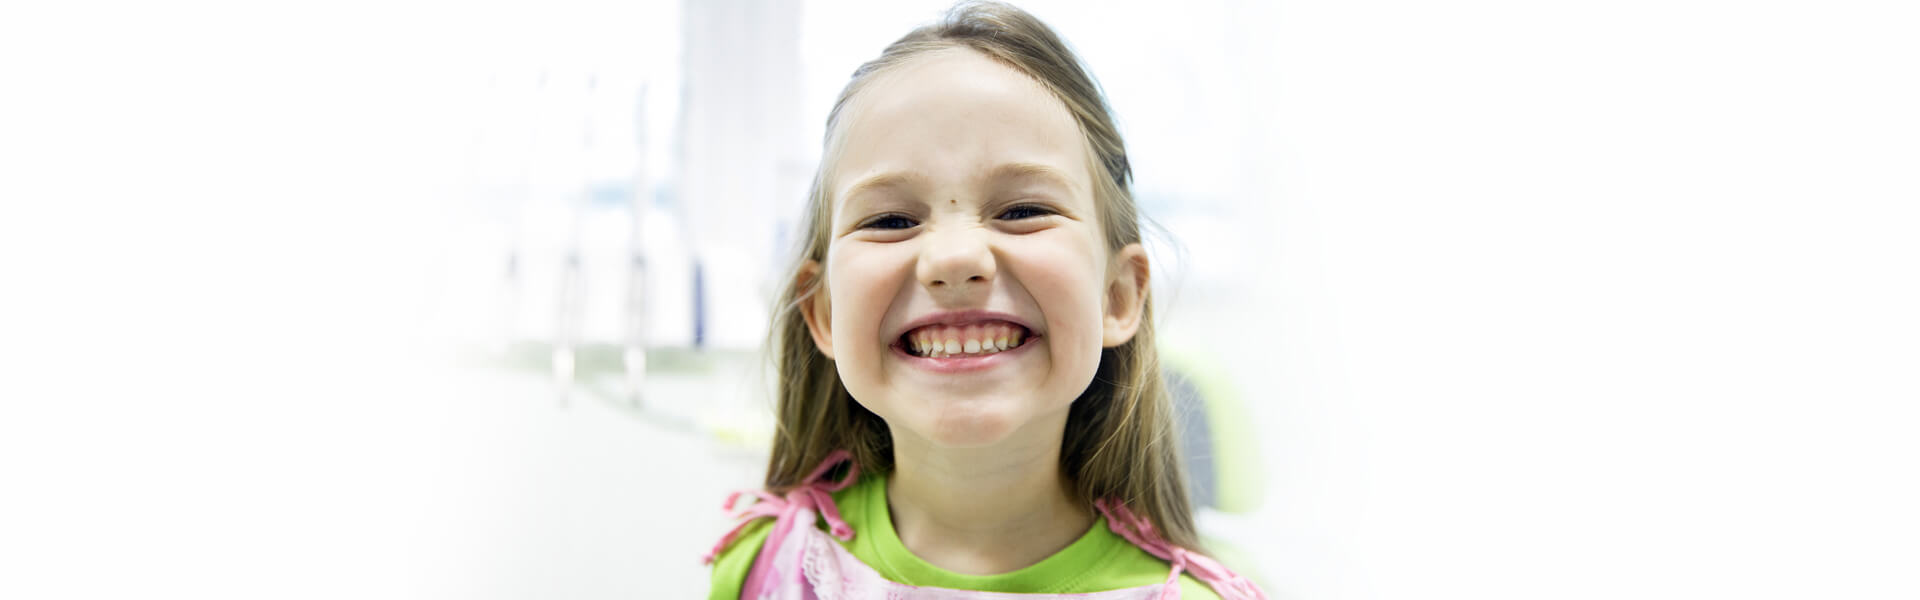 Does Your Child Need Visits to a Pediatric Dentist?